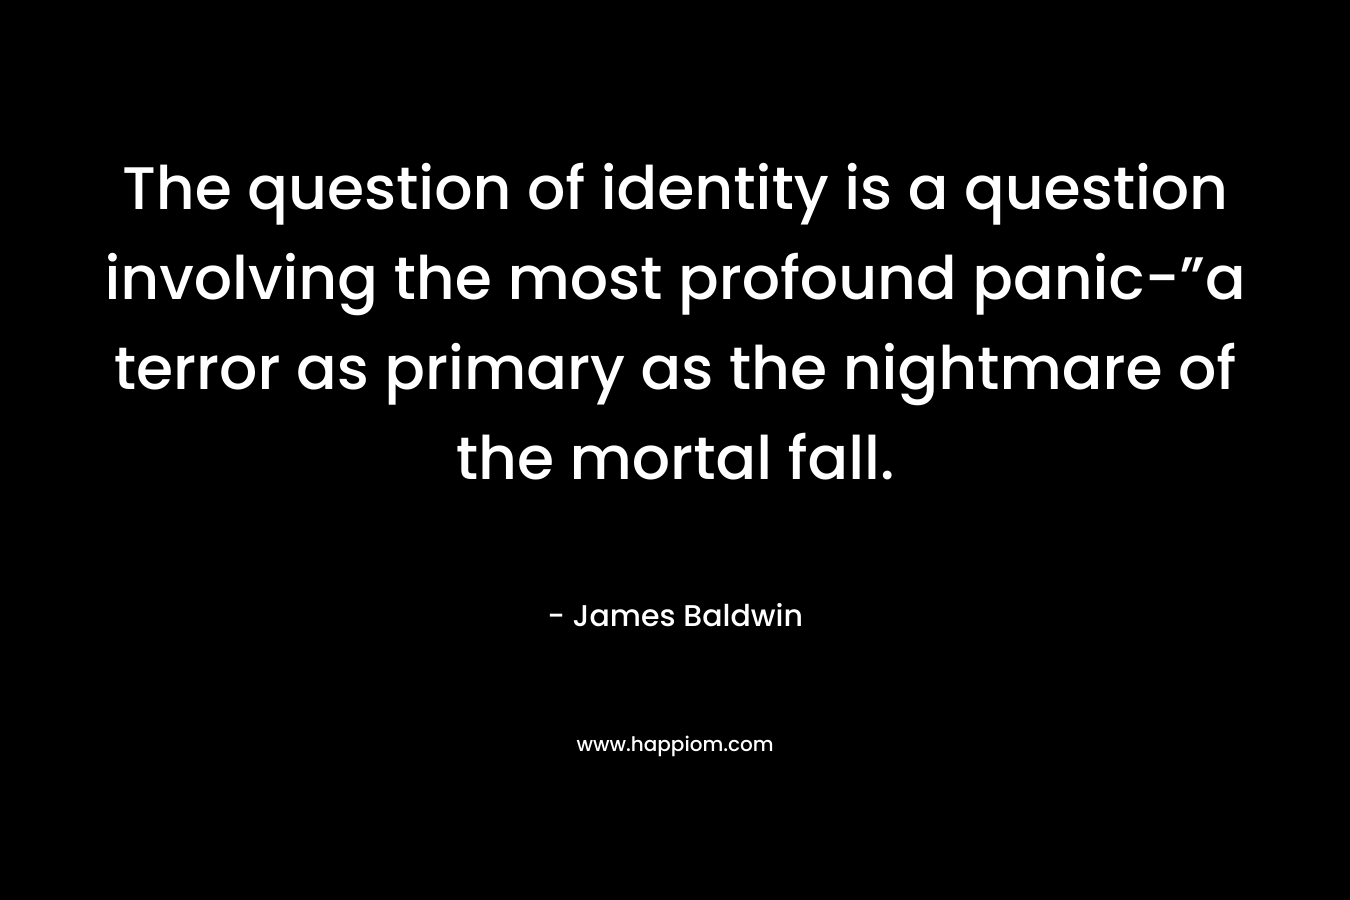 The question of identity is a question involving the most profound panic-”a terror as primary as the nightmare of the mortal fall.